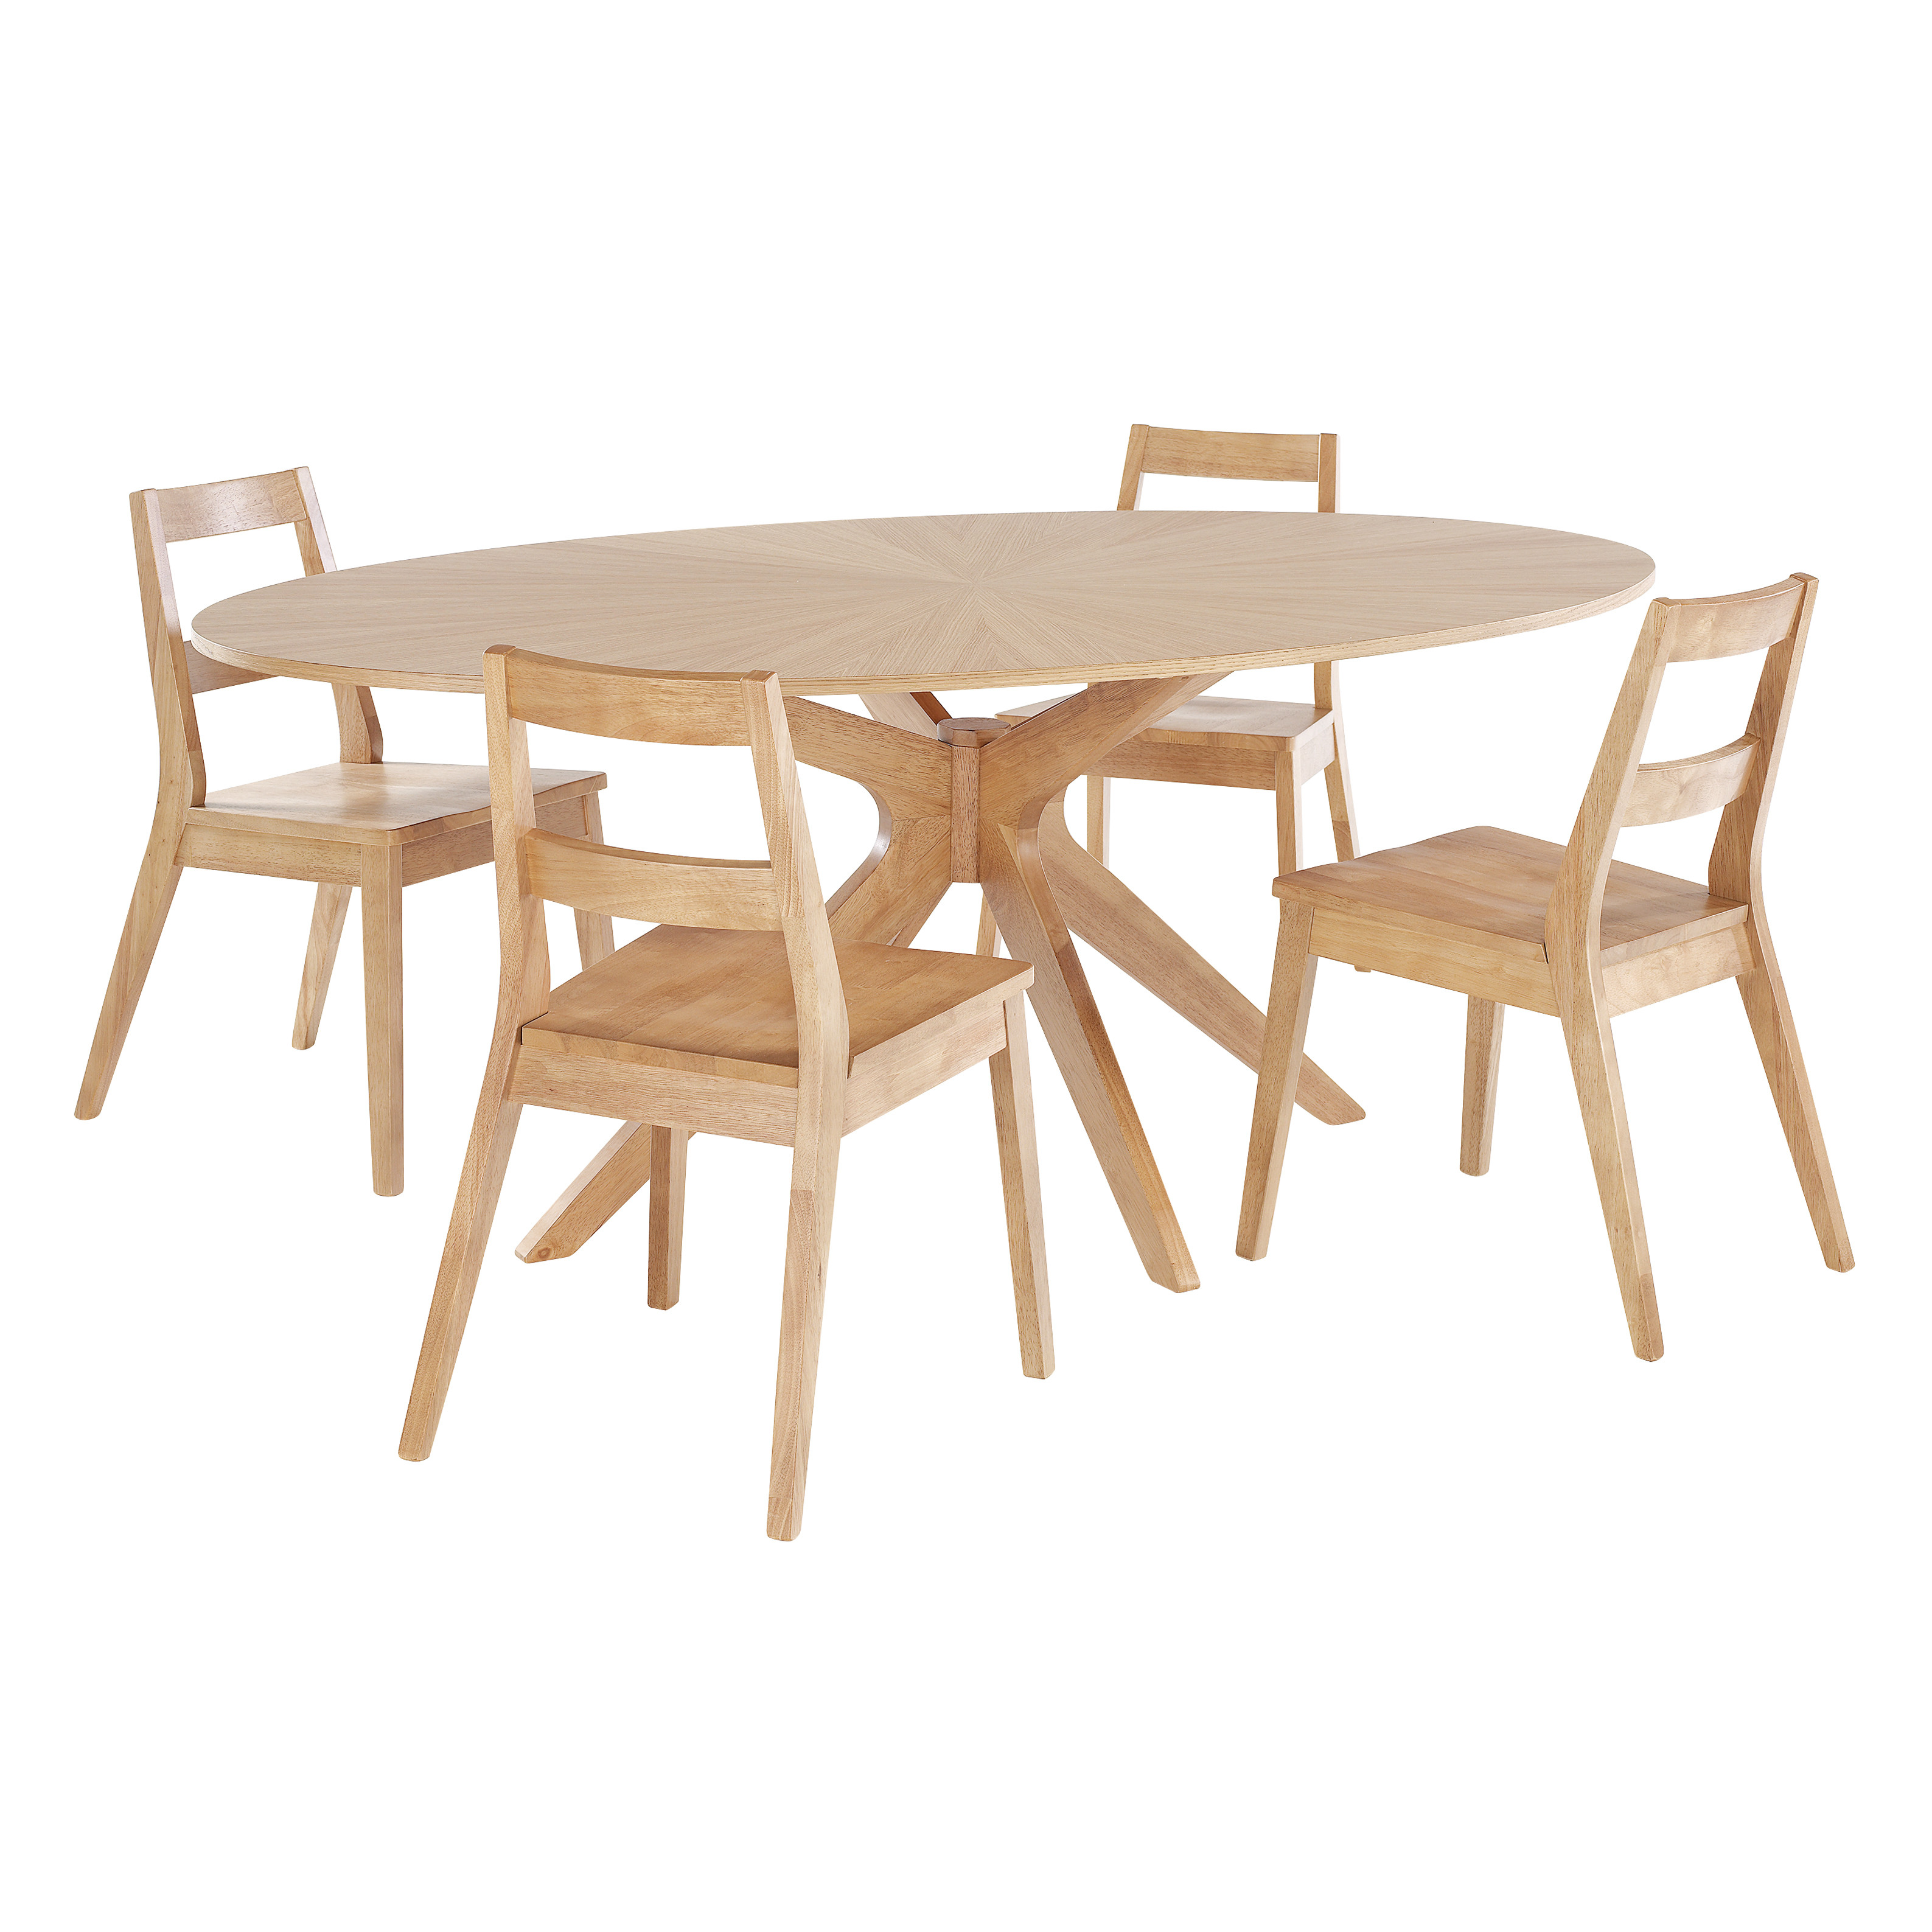 Malmo Dining Table White Oak - Dining Tables - Dining Tables and Chairs